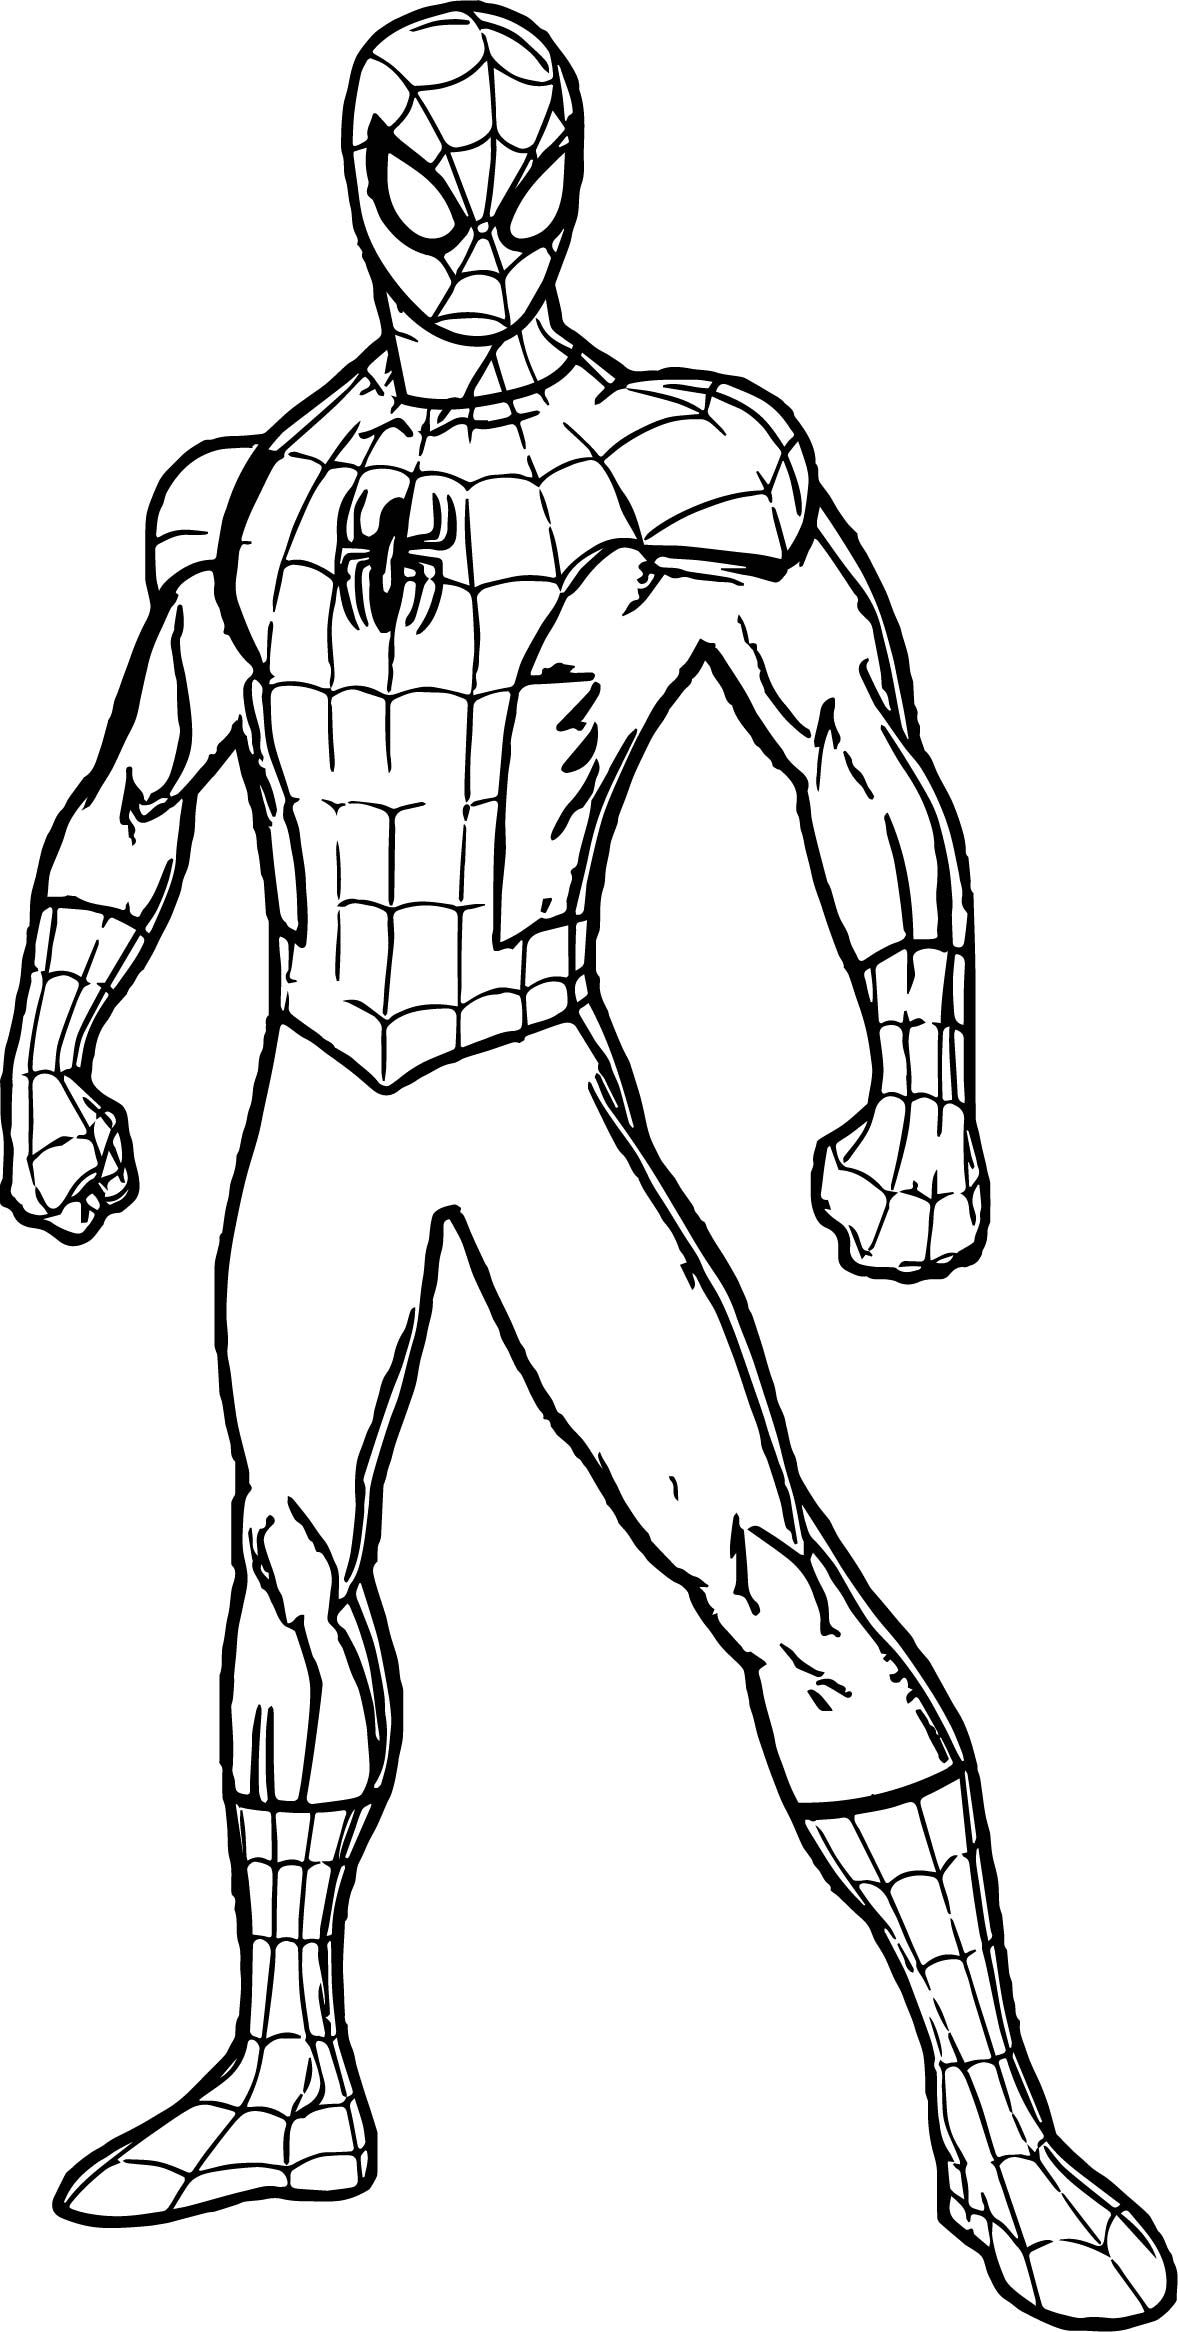 Spidey Spider Man Coloring Page   Wecoloringpage.com In 20 ...